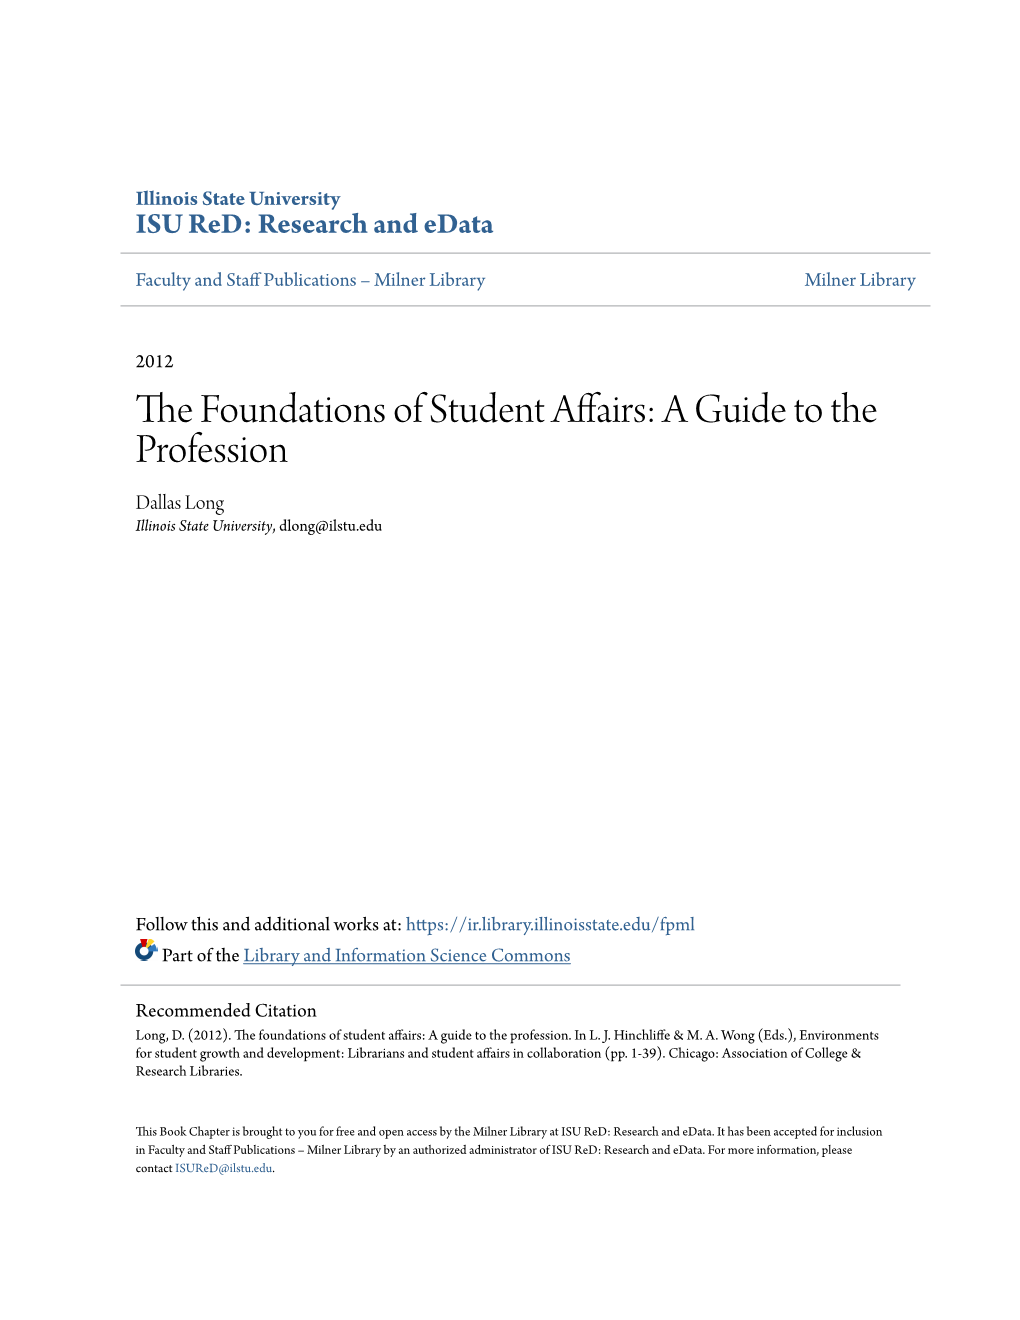 The Foundations of Student Affairs: a Guide to the Profession